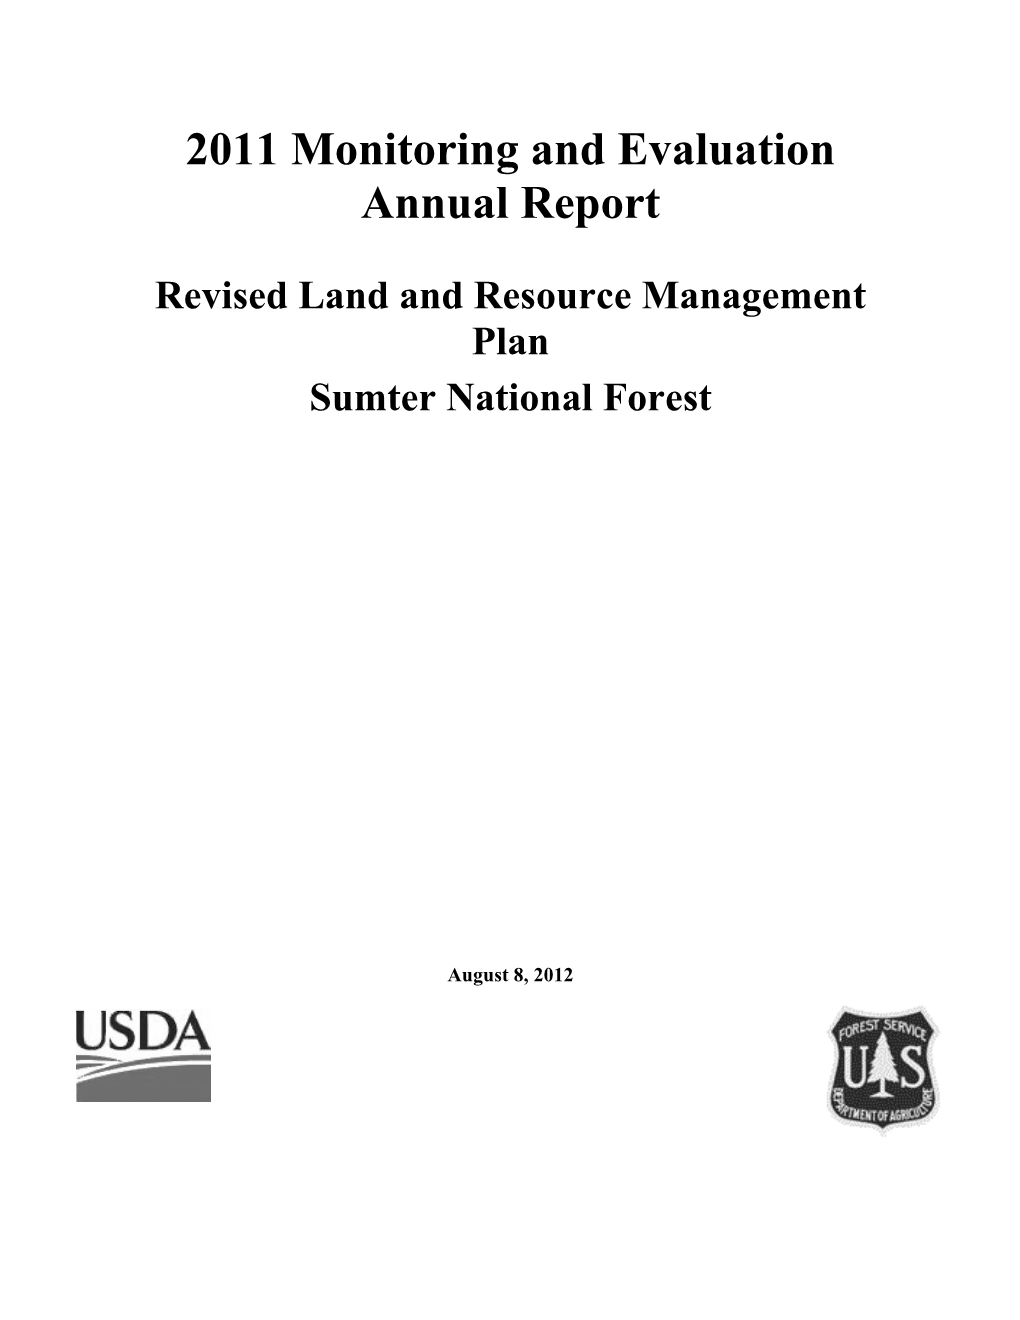 Francis Marion FY 2003 Monitoring Report